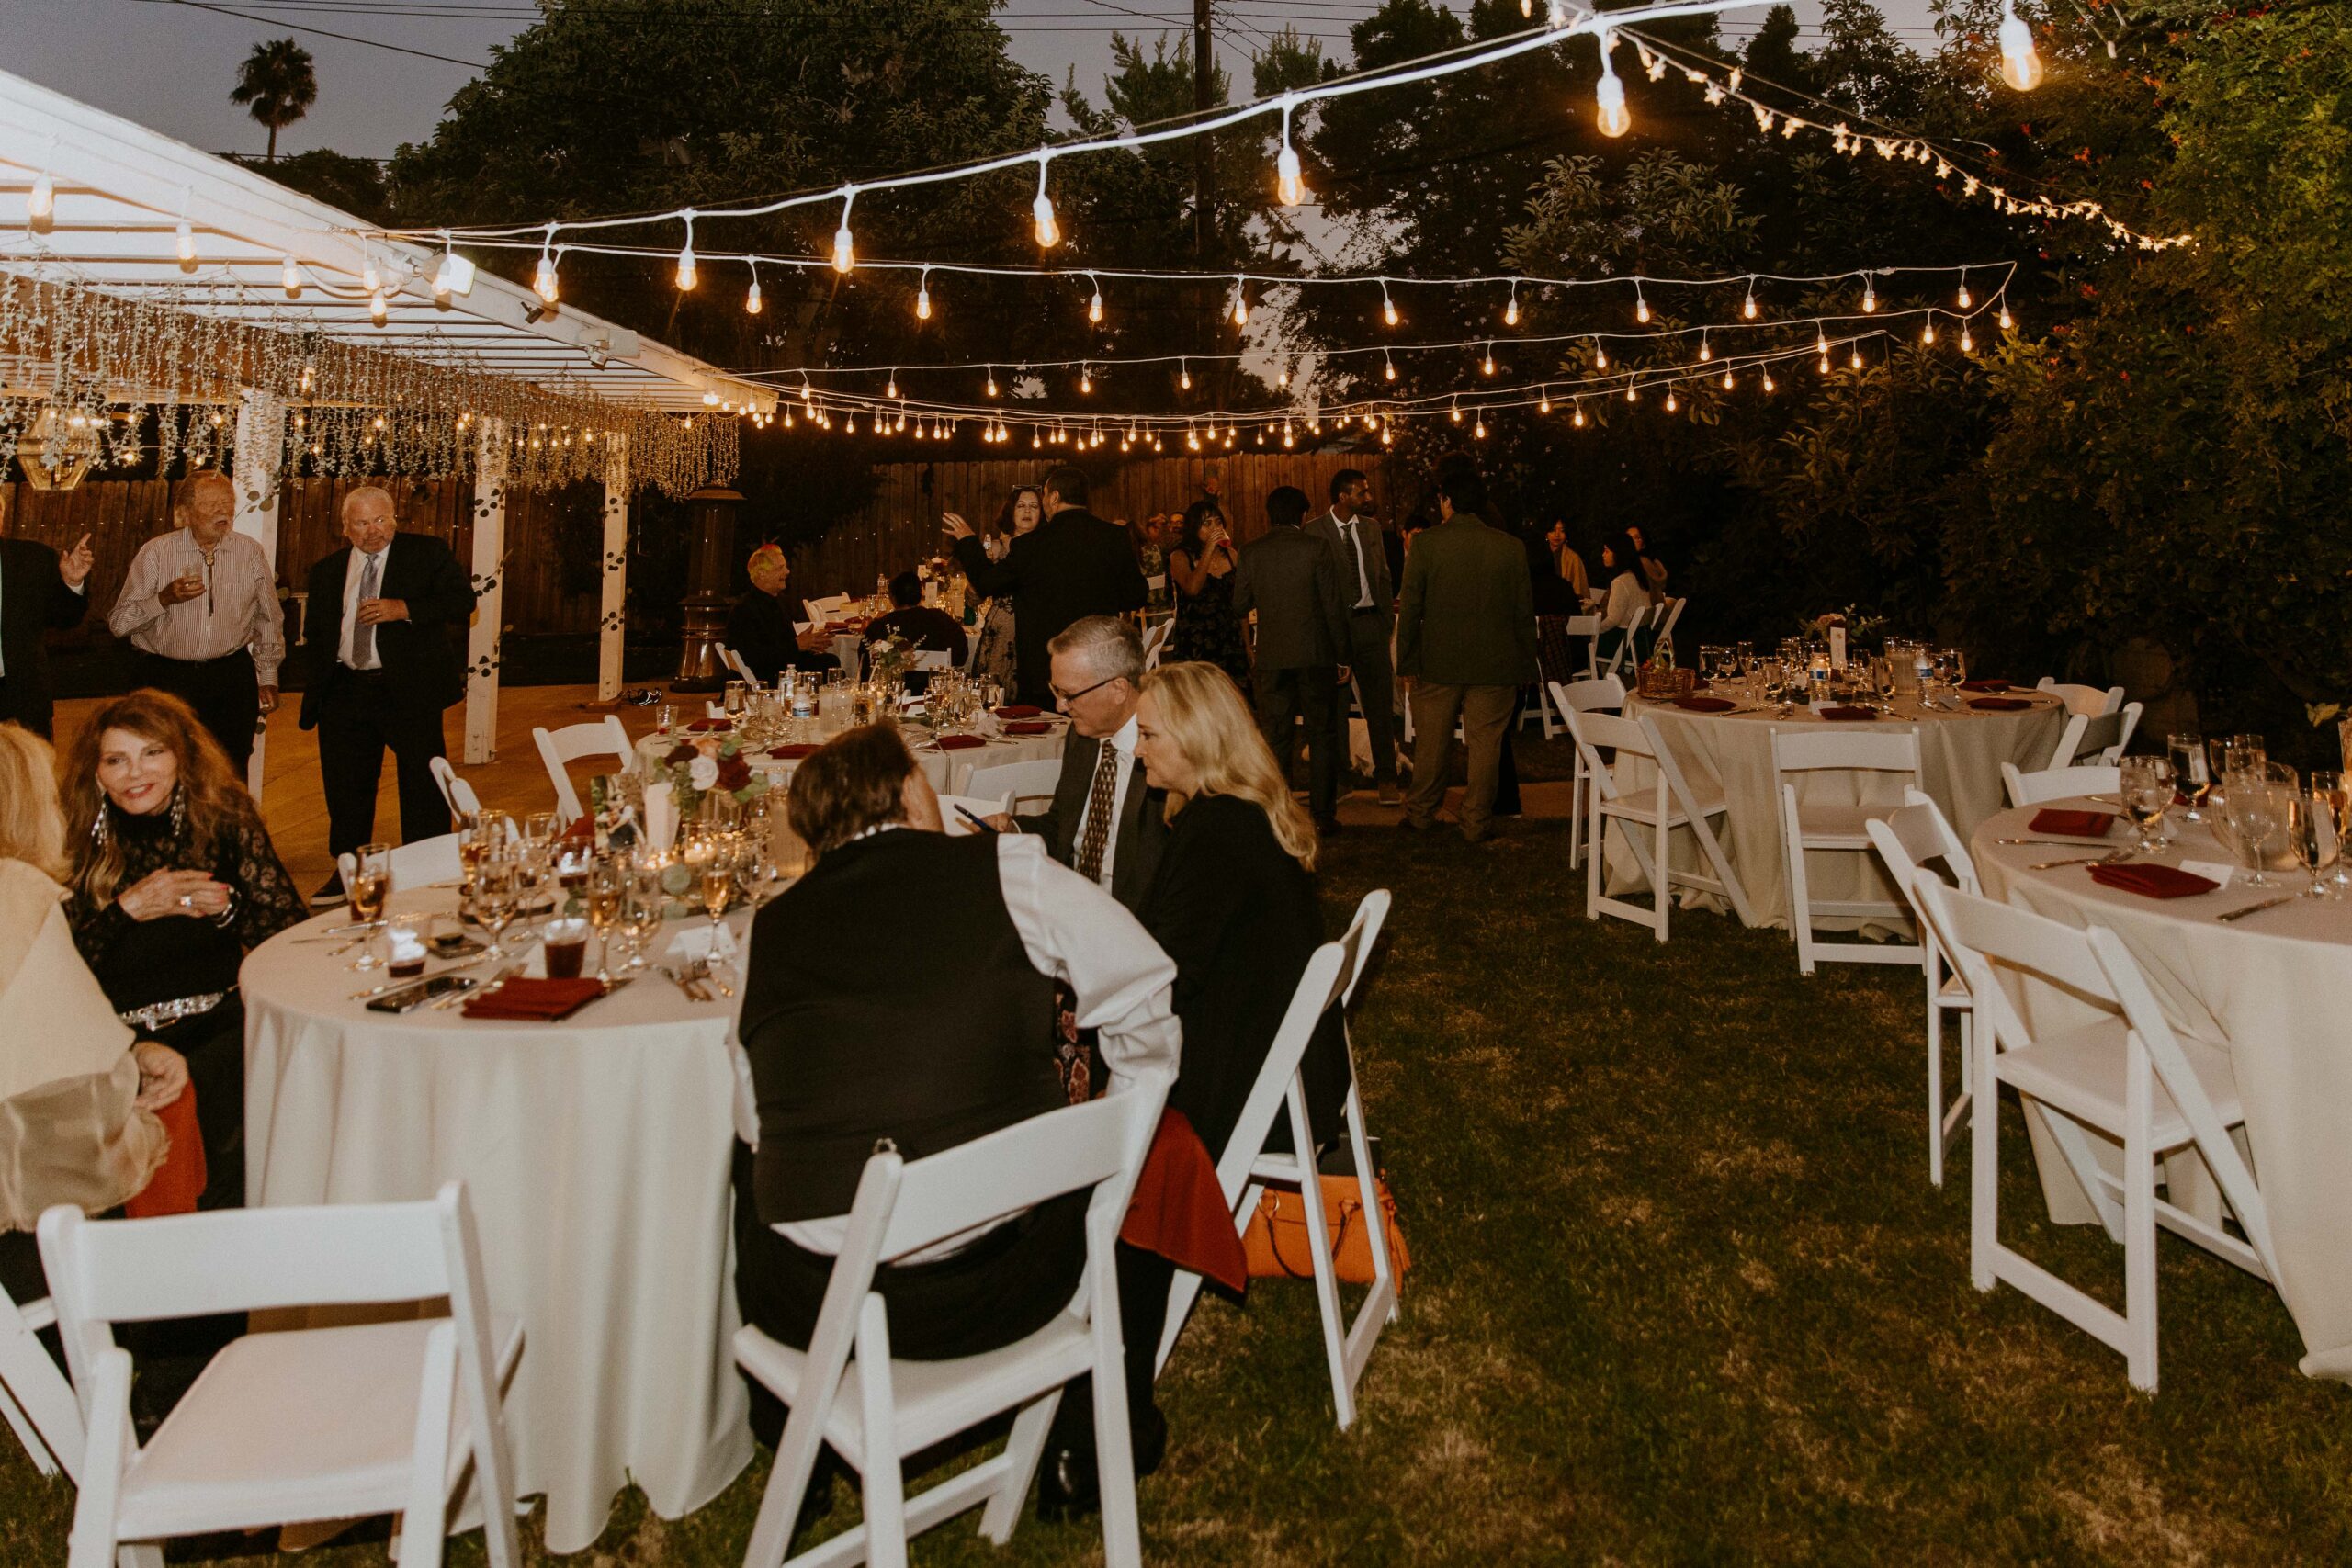 An evening outdoor intimate backyard wedding event with guests seated and mingling under string lights.